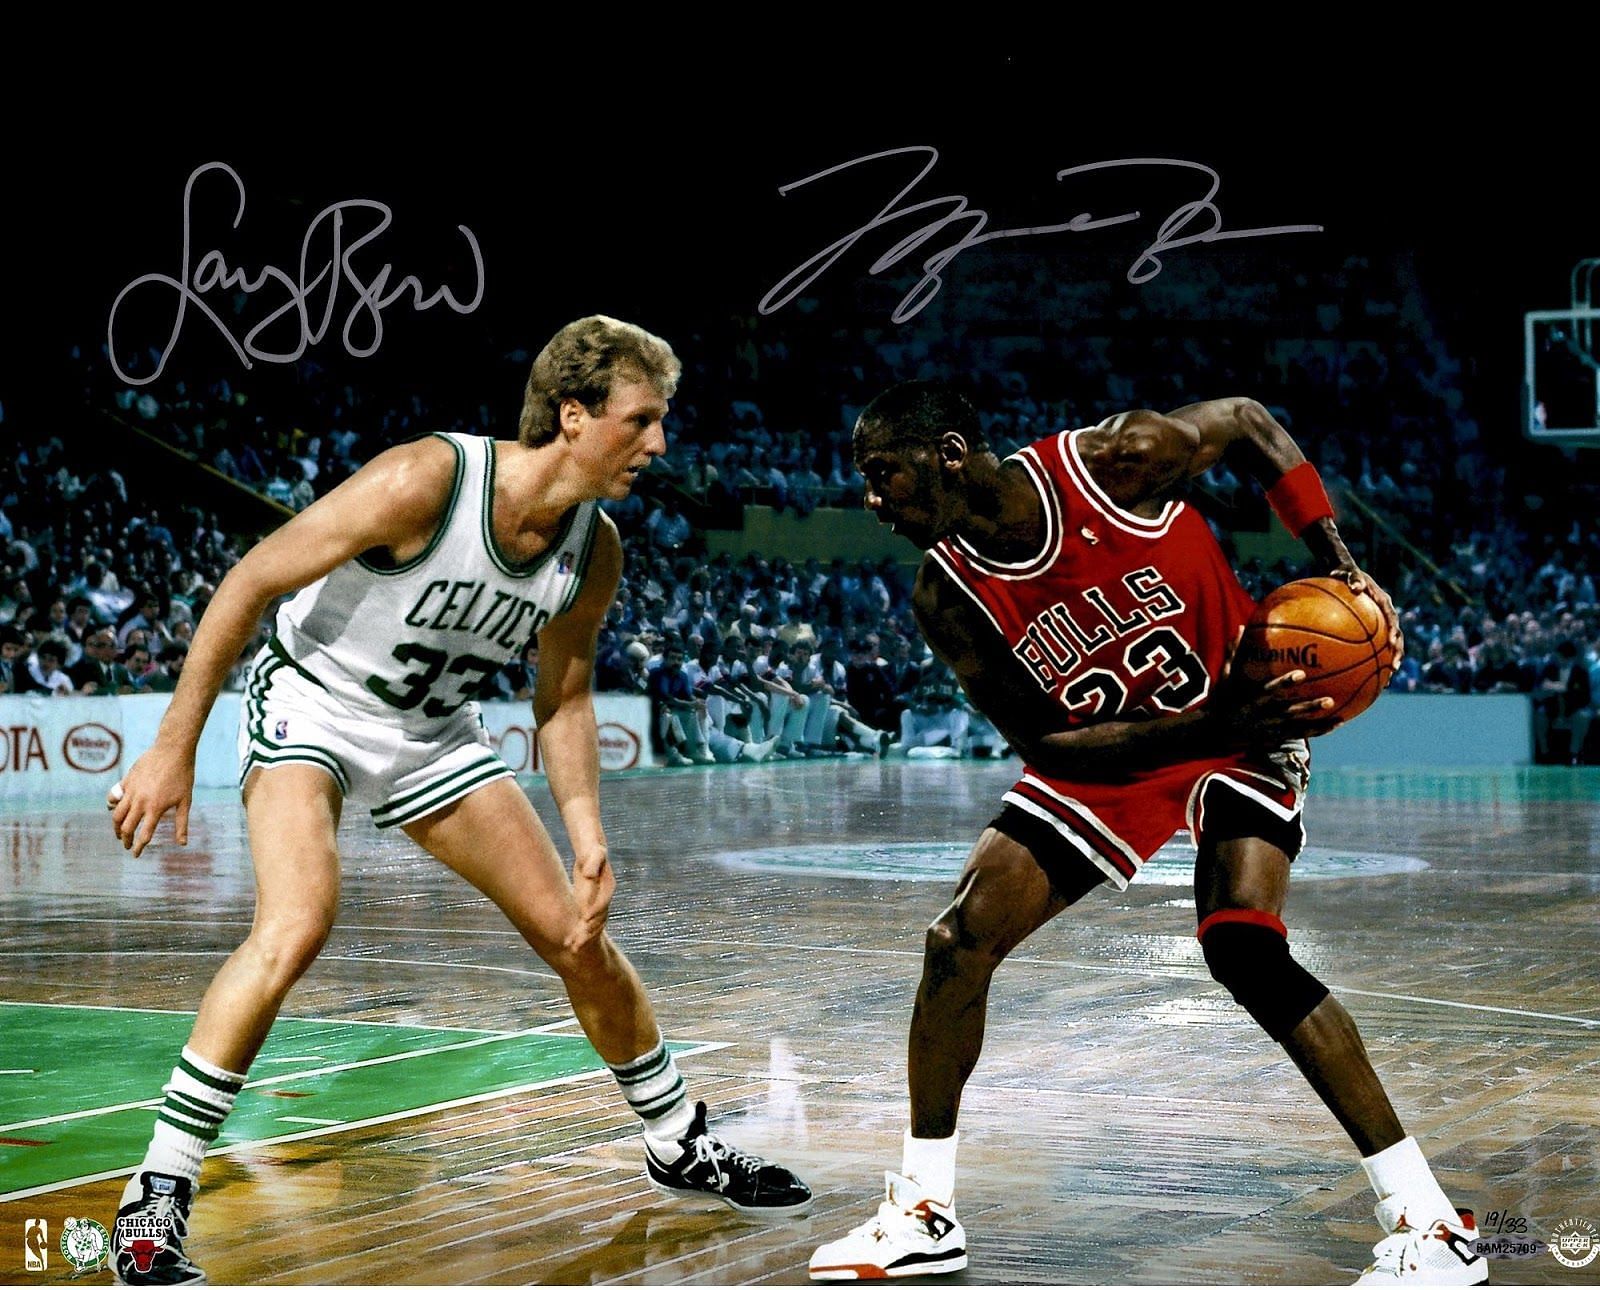 Michael Jordan once dropped 63 points on Larry Bird and the Boston Celtics in the 1986 playoffs. [Photo: Celtics Life]